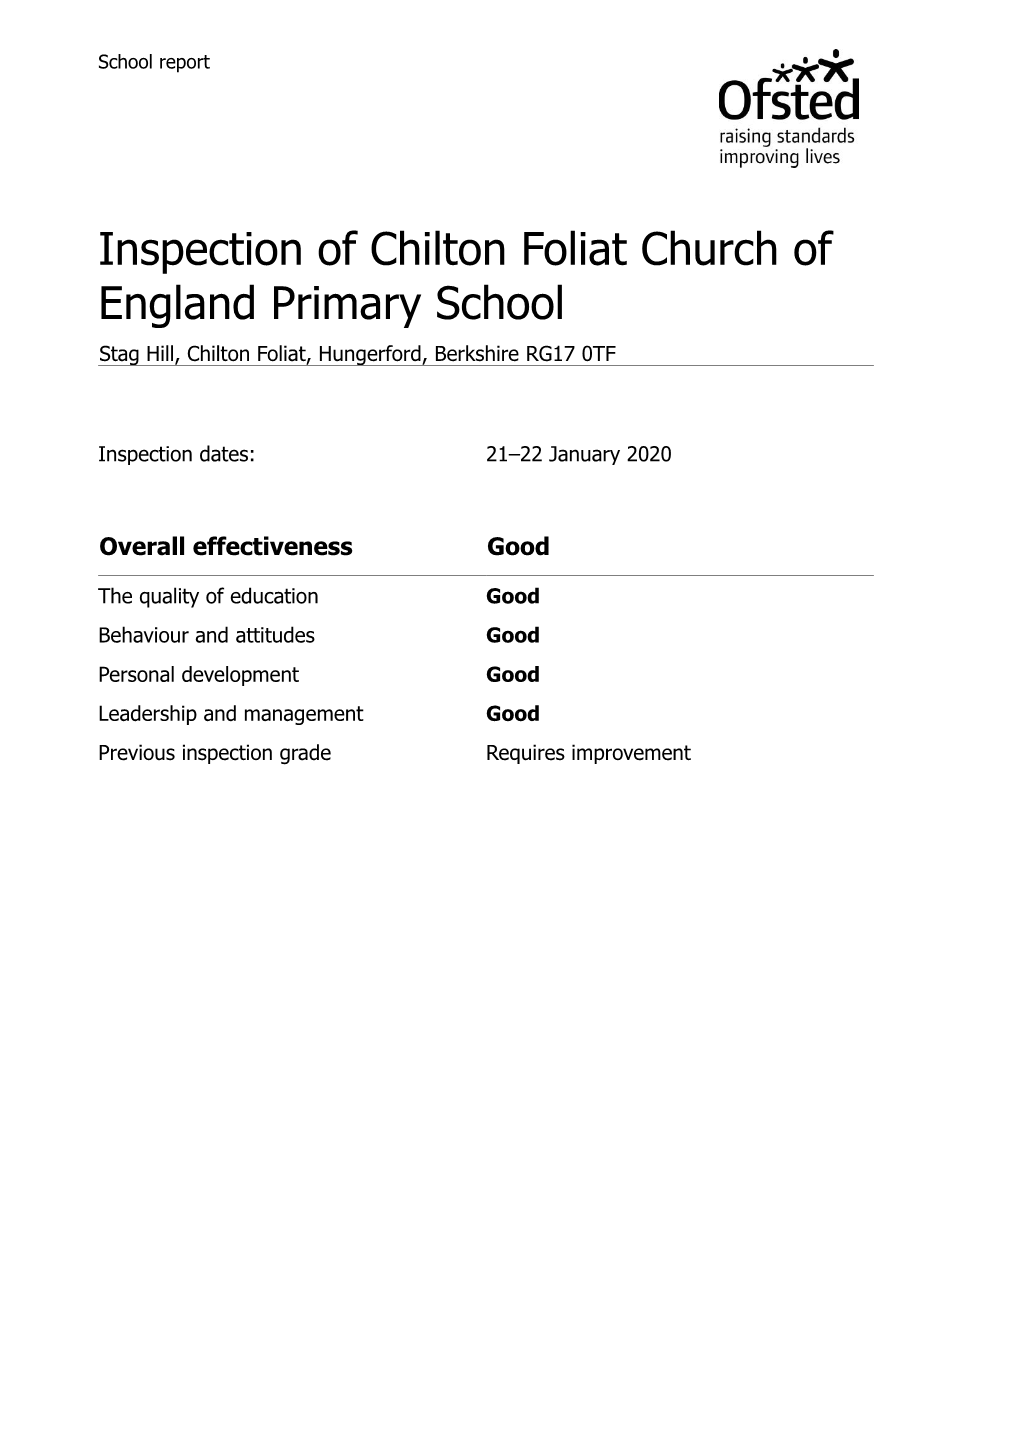 Inspection of Chilton Foliat Church of England Primary School Stag Hill, Chilton Foliat, Hungerford, Berkshire RG17 0TF